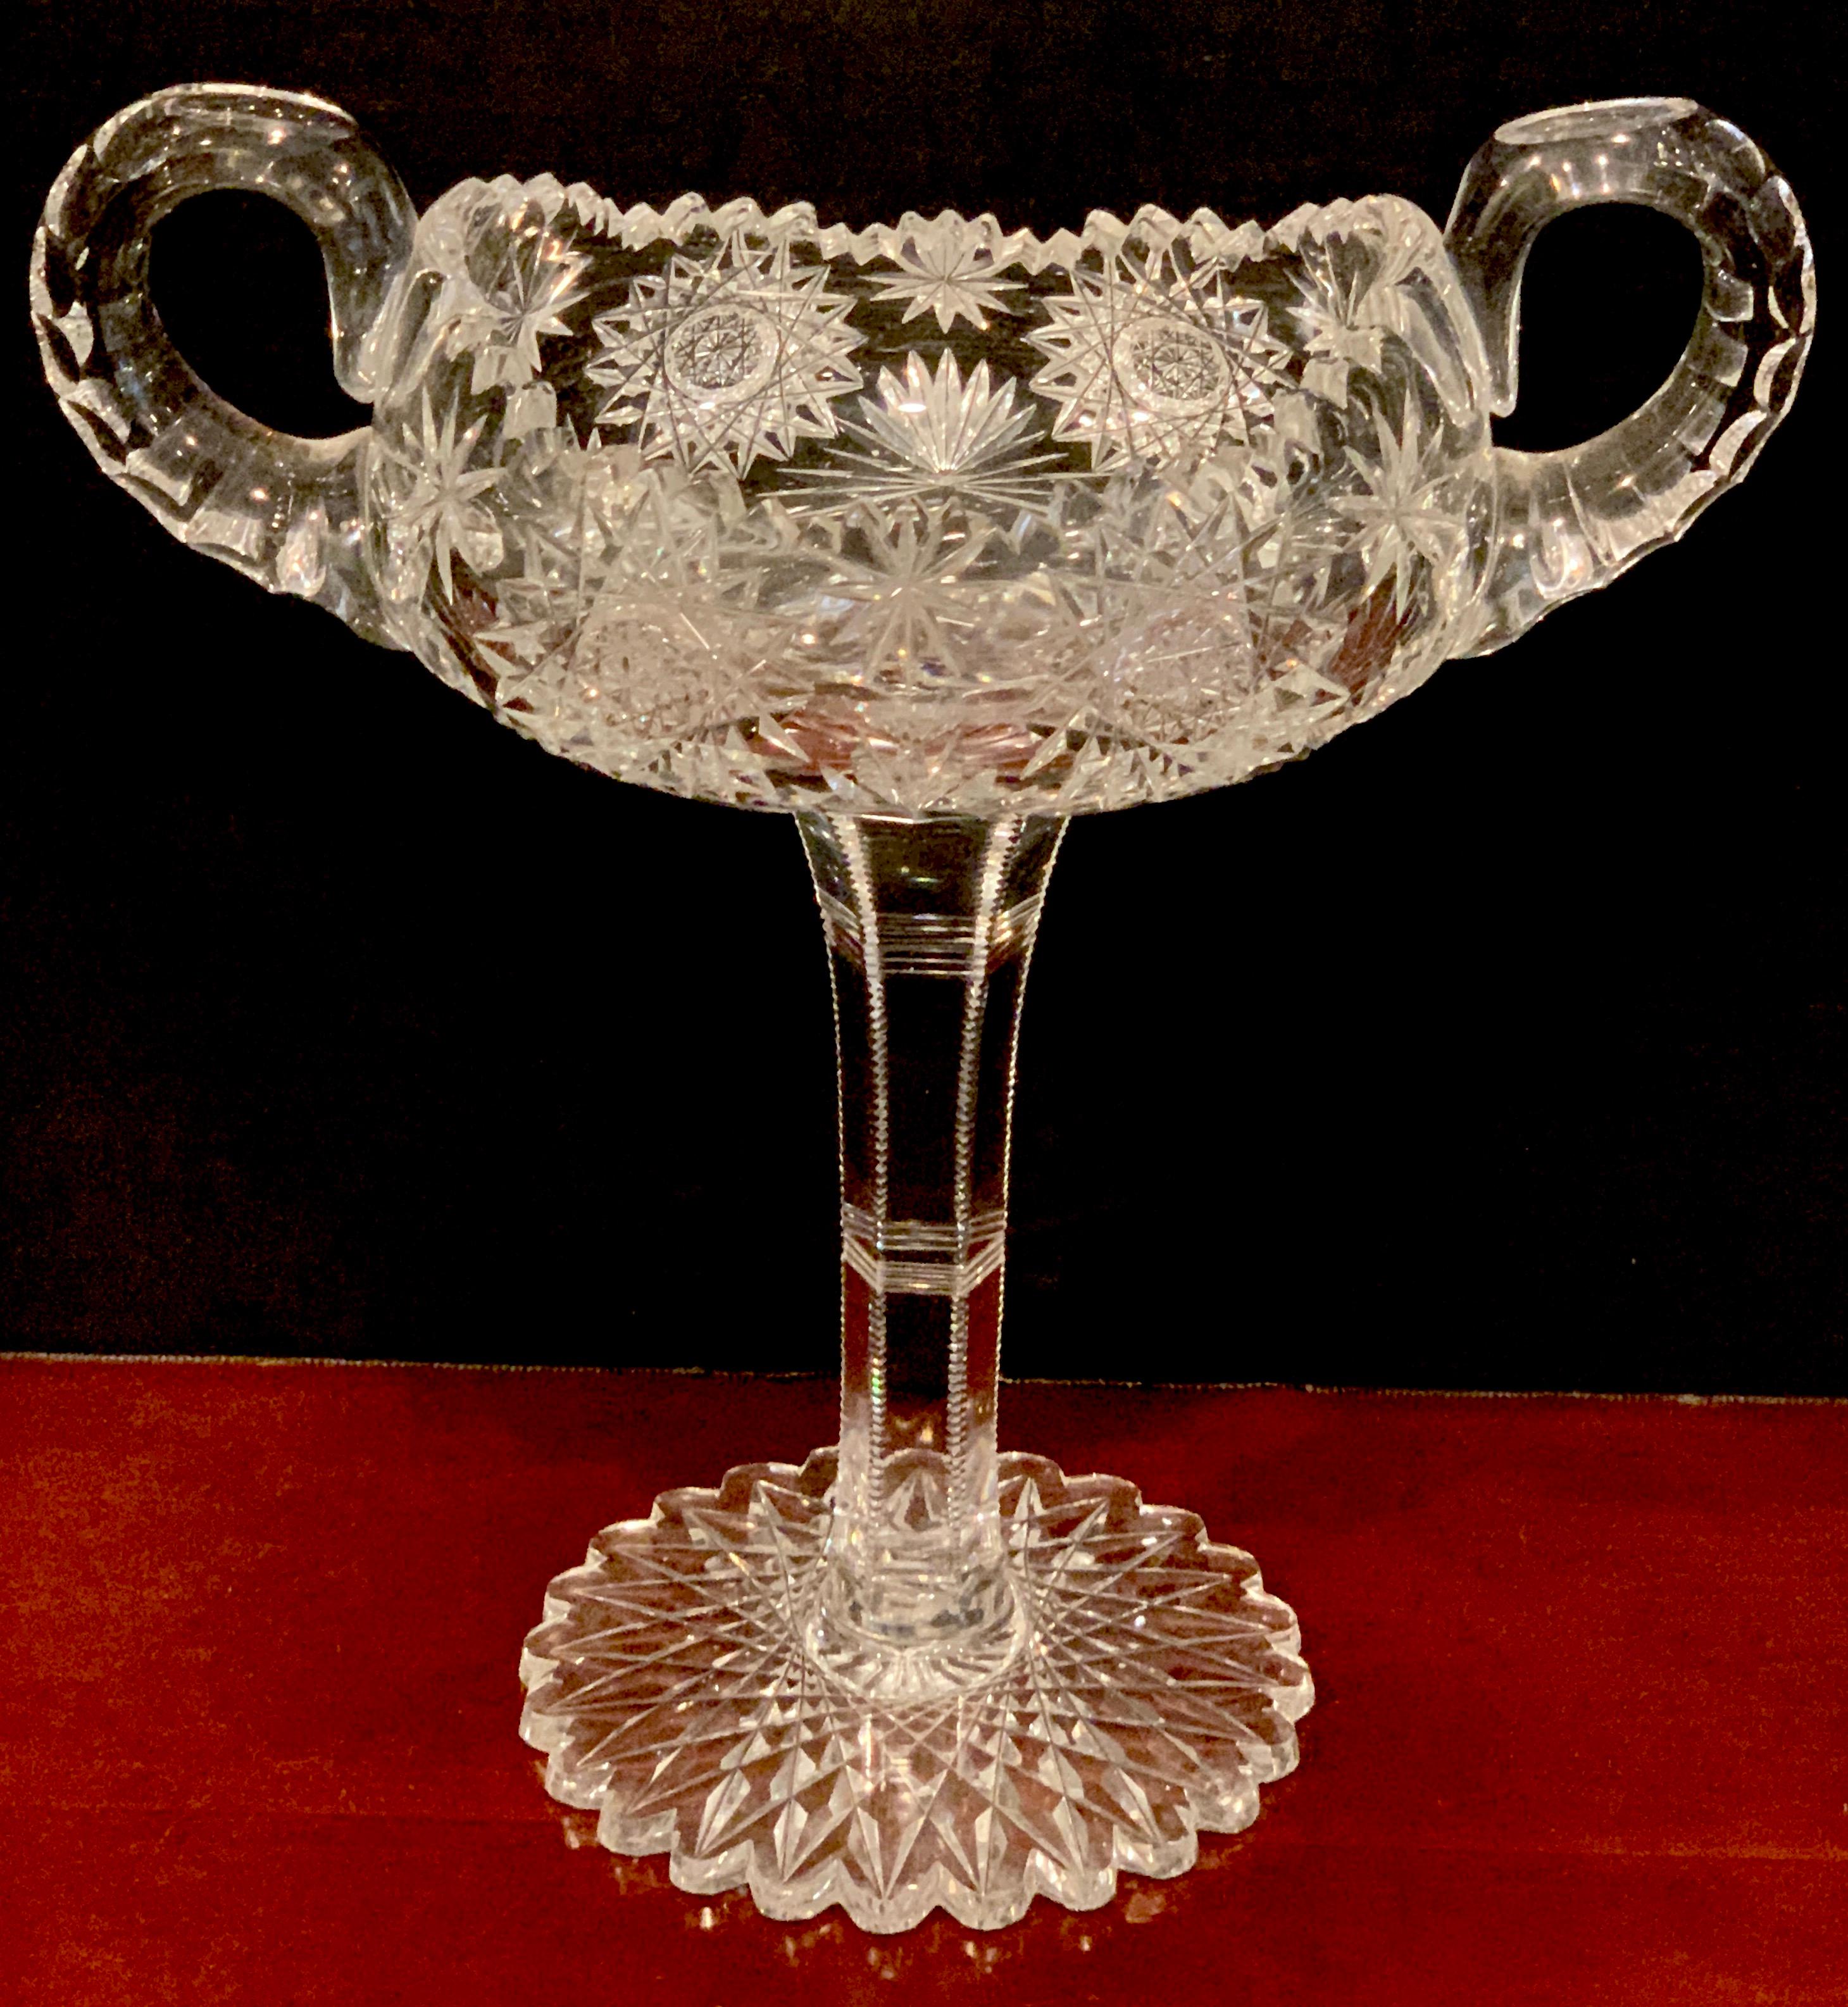 American brilliant cut glass footed double- handled nappy, thick clear blank, rare form
The interior of the bowl measures 5